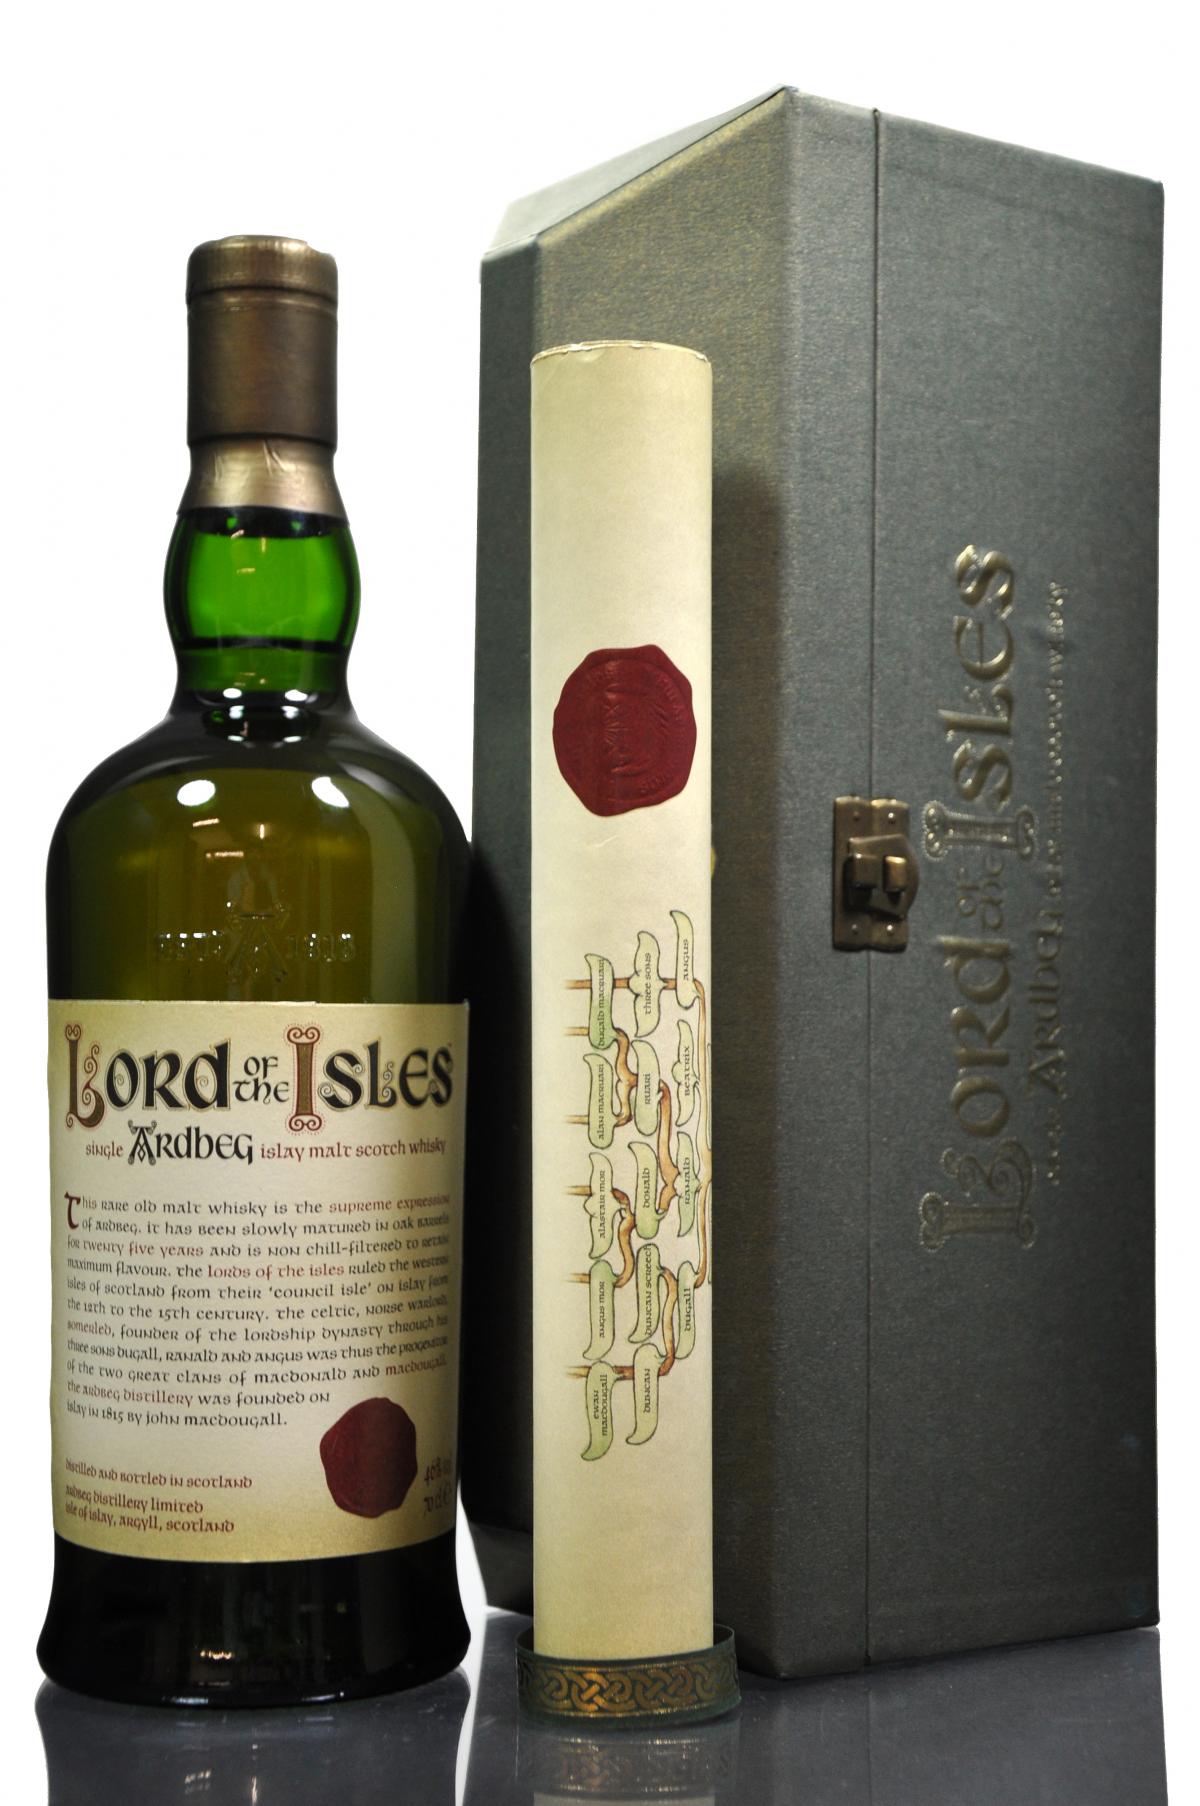 Ardbeg Lord Of The Isles - 25 Year Old